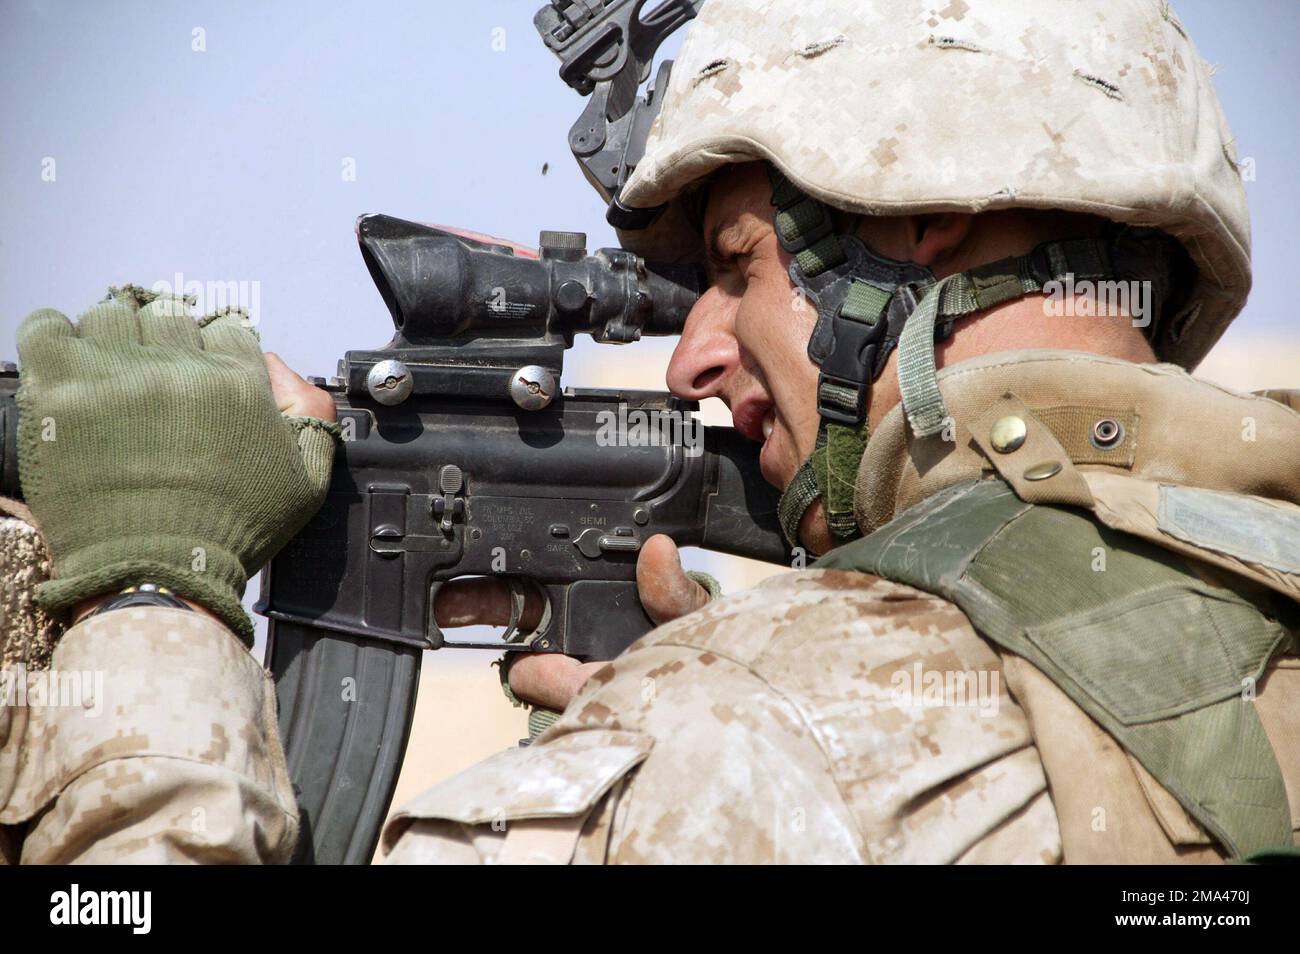 US Marine Corps (USMC) personnel with the 1ST Battalion, 8th Marines, searches for insurgents and weapons through his scope during Operation Al Fajr, in support of Operation IRAQI FREEDOM. Subject Operation/Series: IRAQI FREEDOM Base: Fallujah State: Al Anbar Country: Iraq (IRQ) Stock Photo